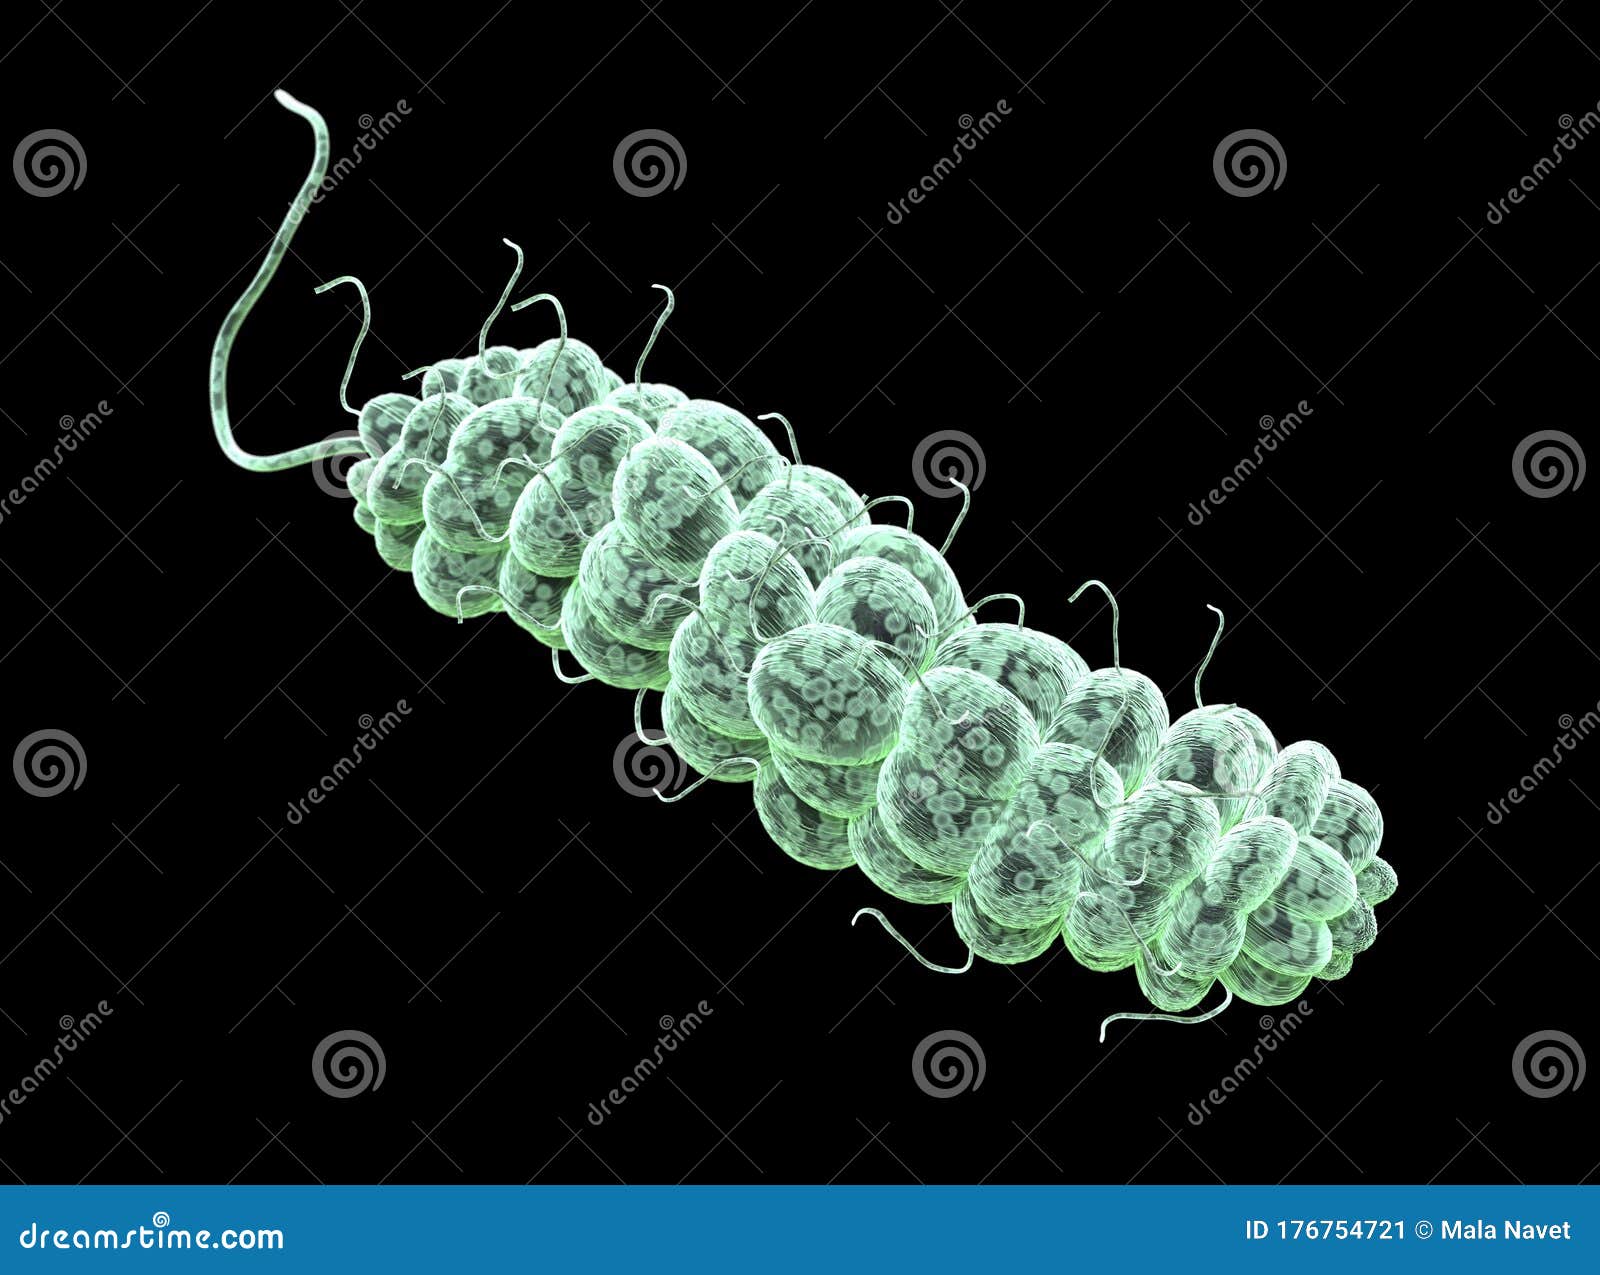 E Coli Bacteria. Flagellate Rods Type Category. Stock Illustration -  Illustration of rods, condition: 176754721